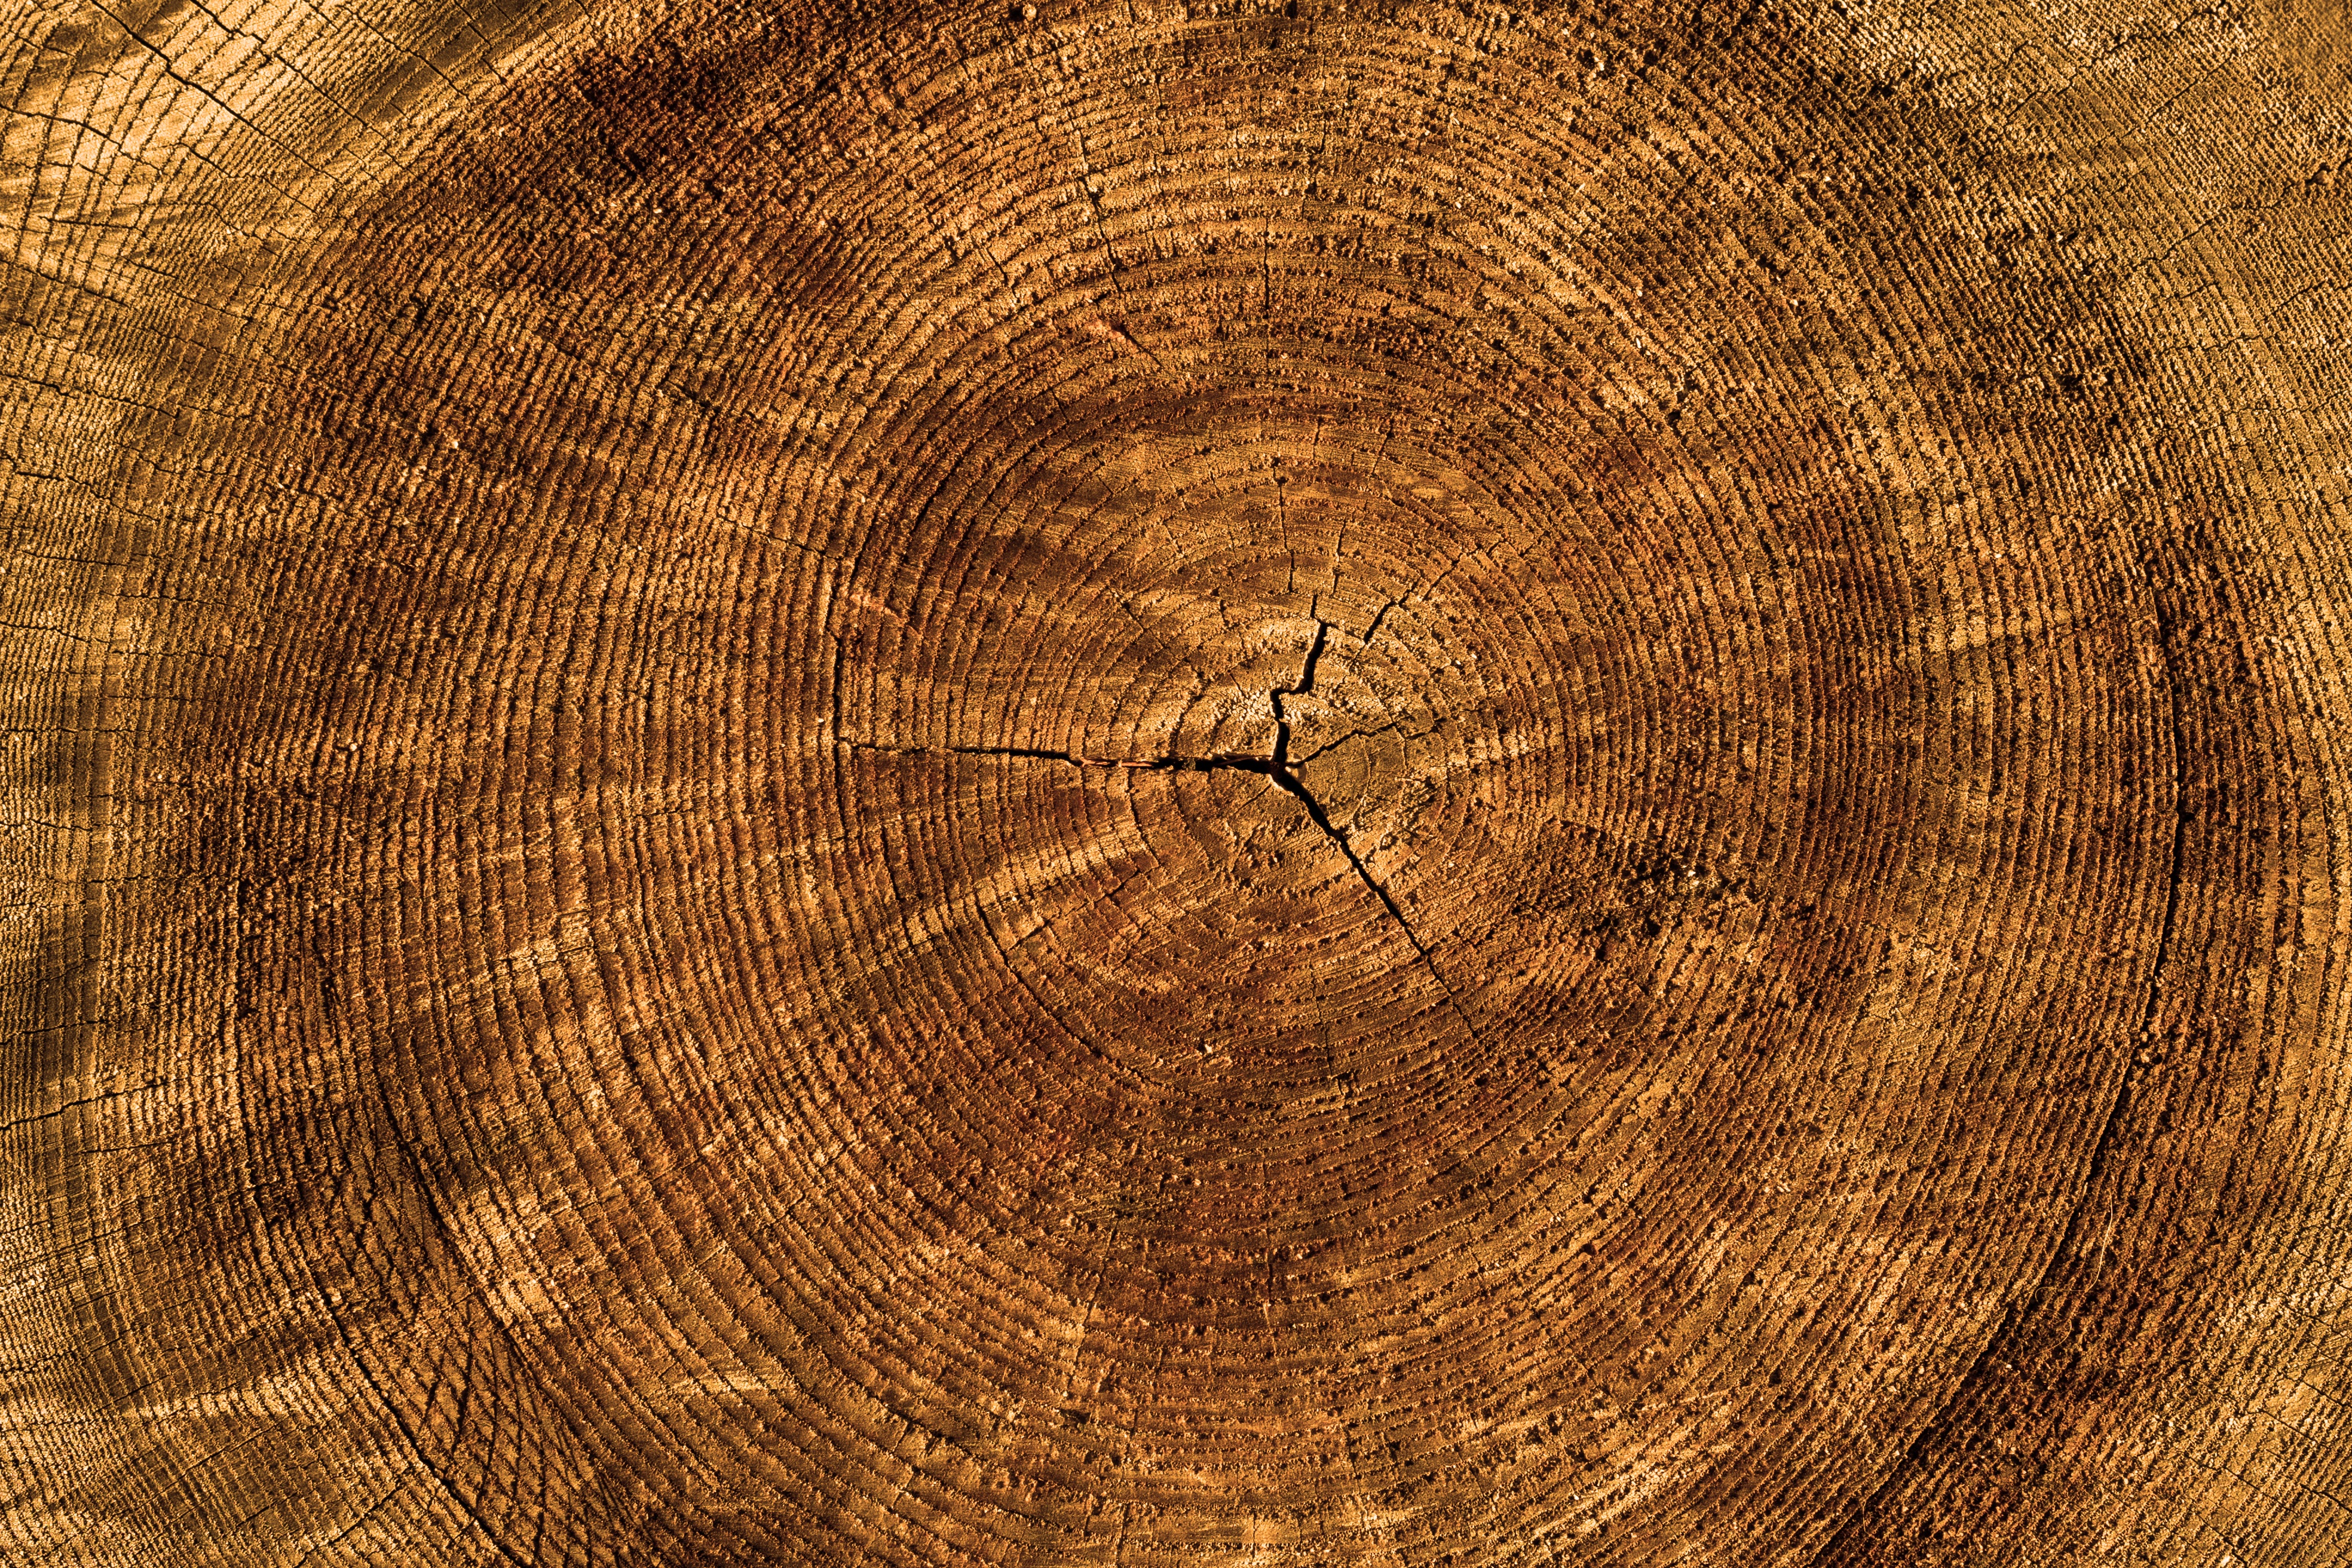 73288 download wallpaper textures, wood, tree, texture, trunk screensavers and pictures for free